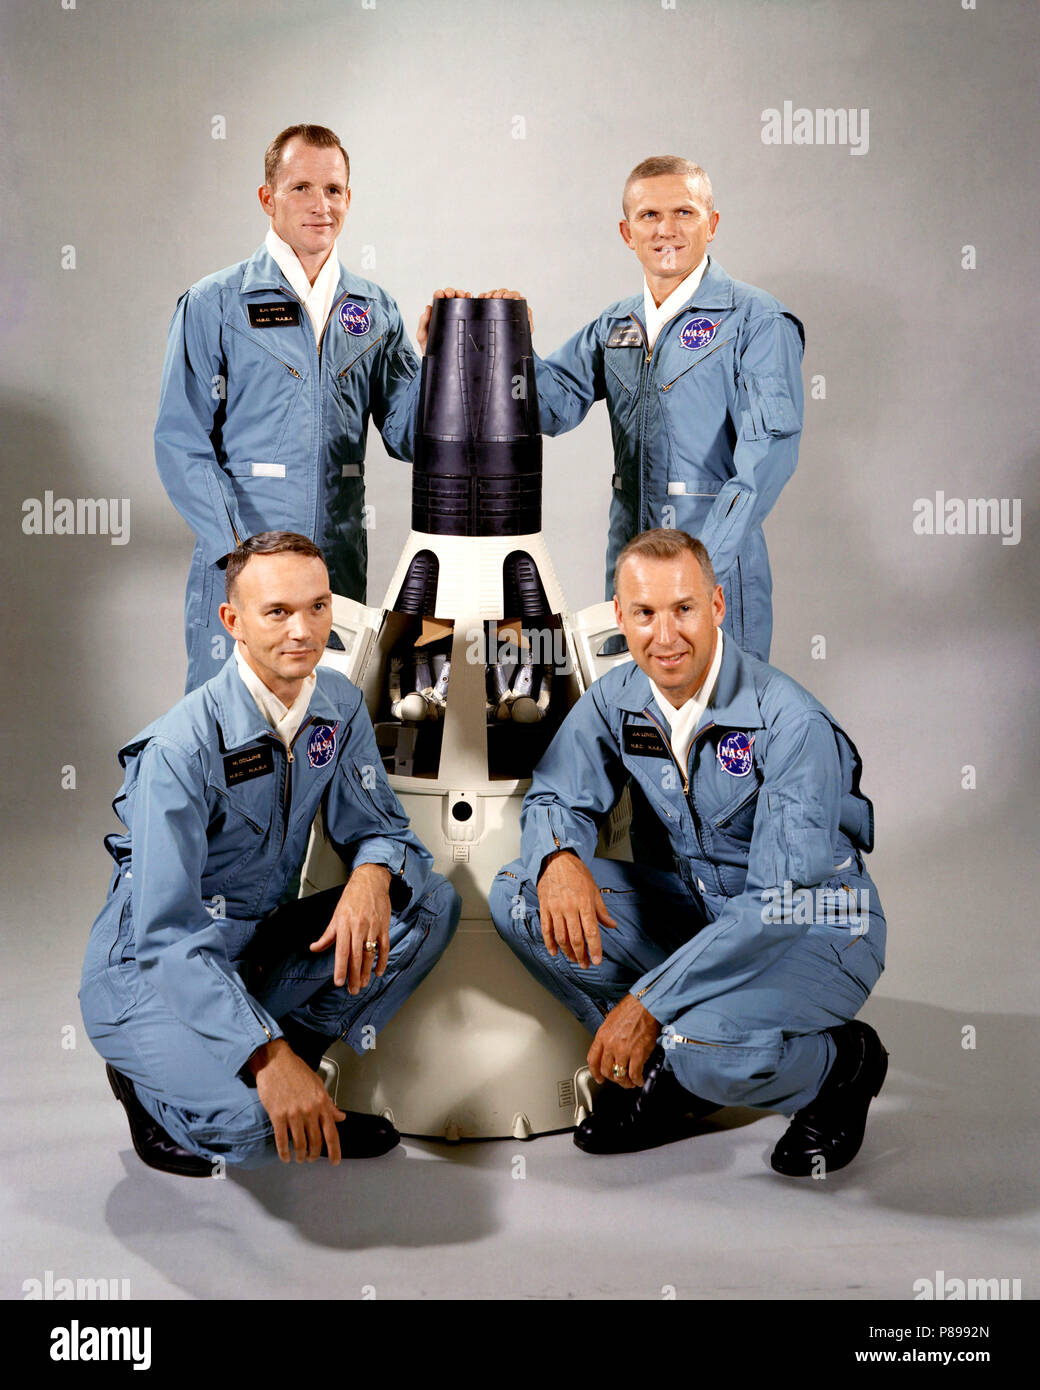 Portrait of the Gemini-7 prime and backup crew members around a model of the Gemini-7 spacecraft. From top right clockwise, Borman, Lovell, Michael Collins, Edward White Stock Photo